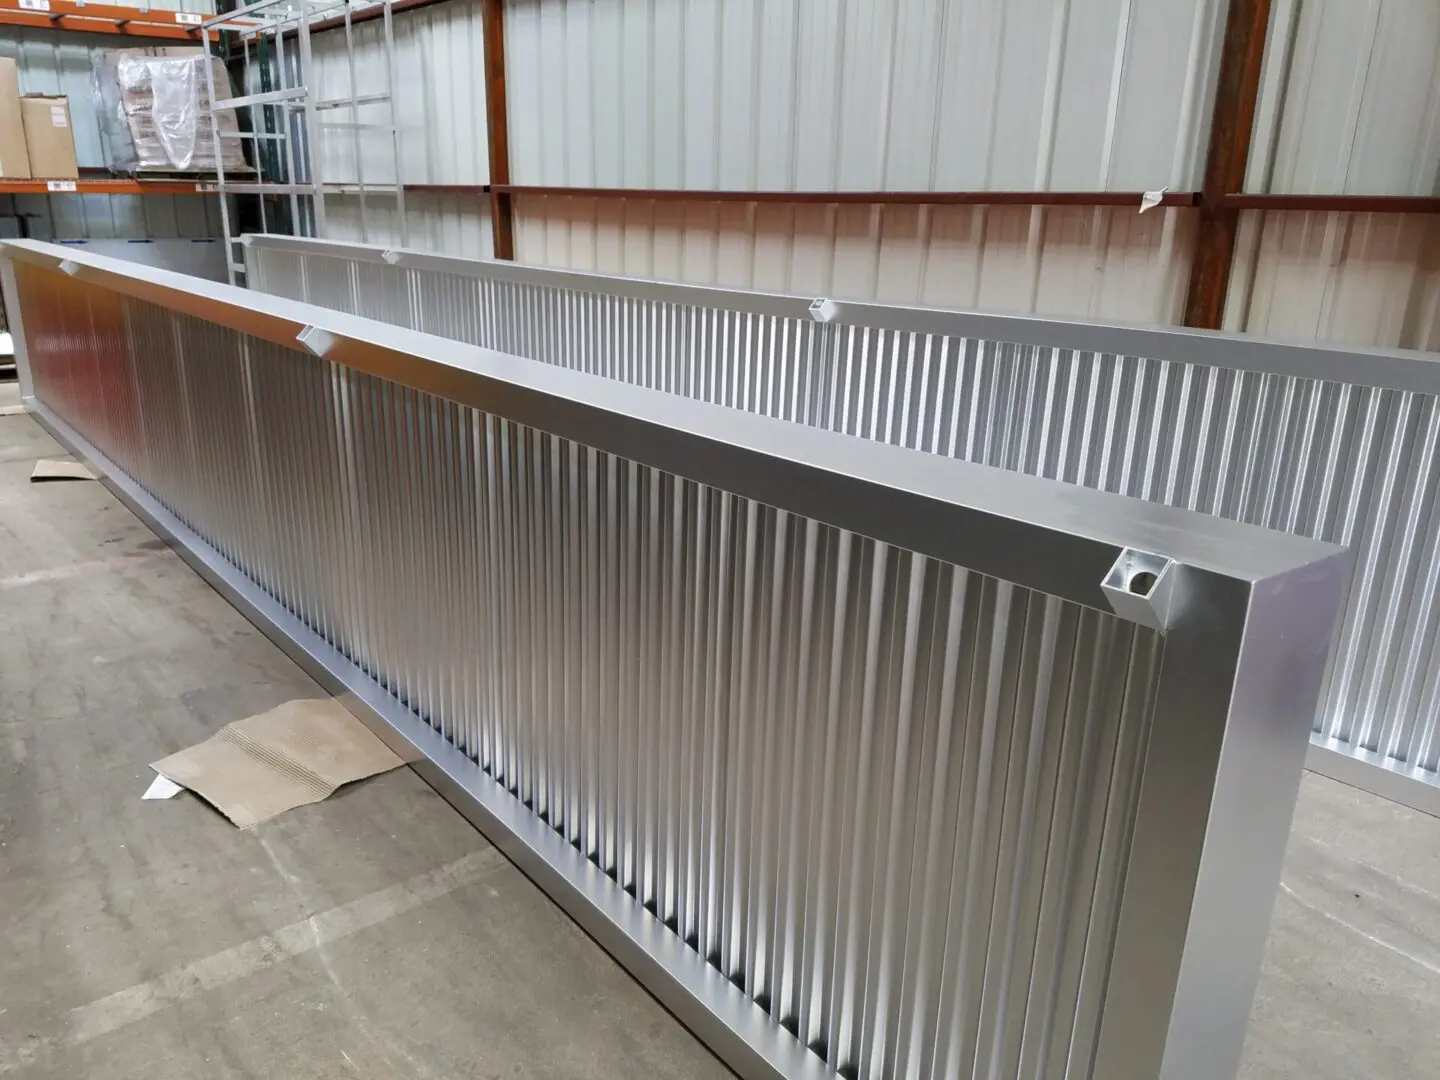 View of the stainless steel railing on the display